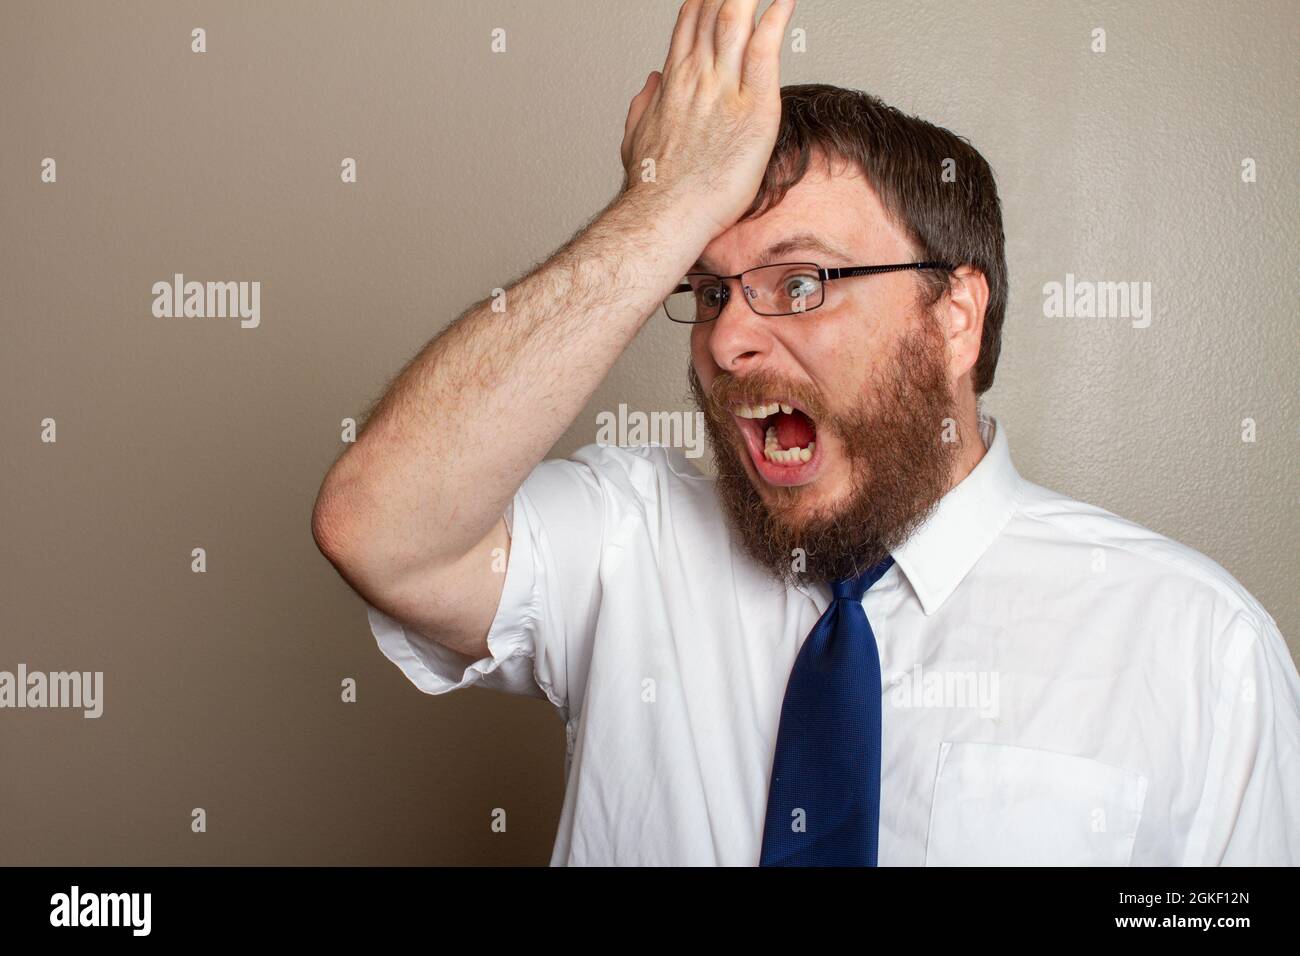 man screaming in anger while banging his forhead Stock Photo